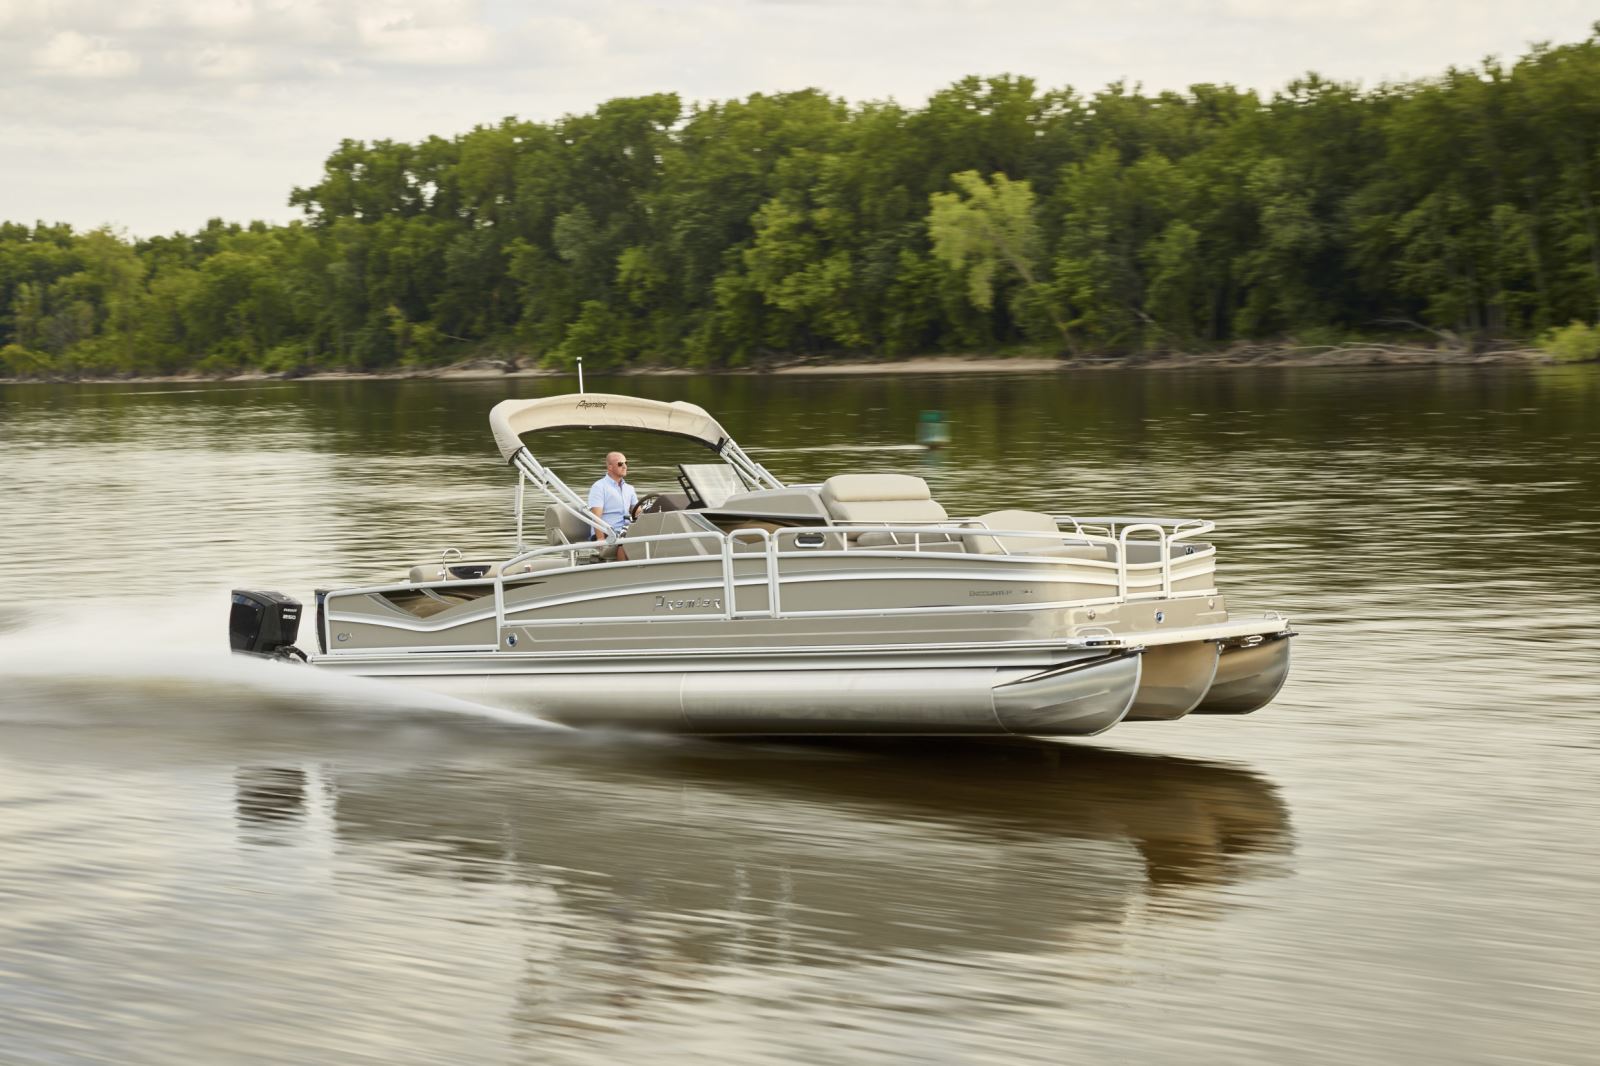 They call it the Encounter, their first center-cabin pontoon model. 